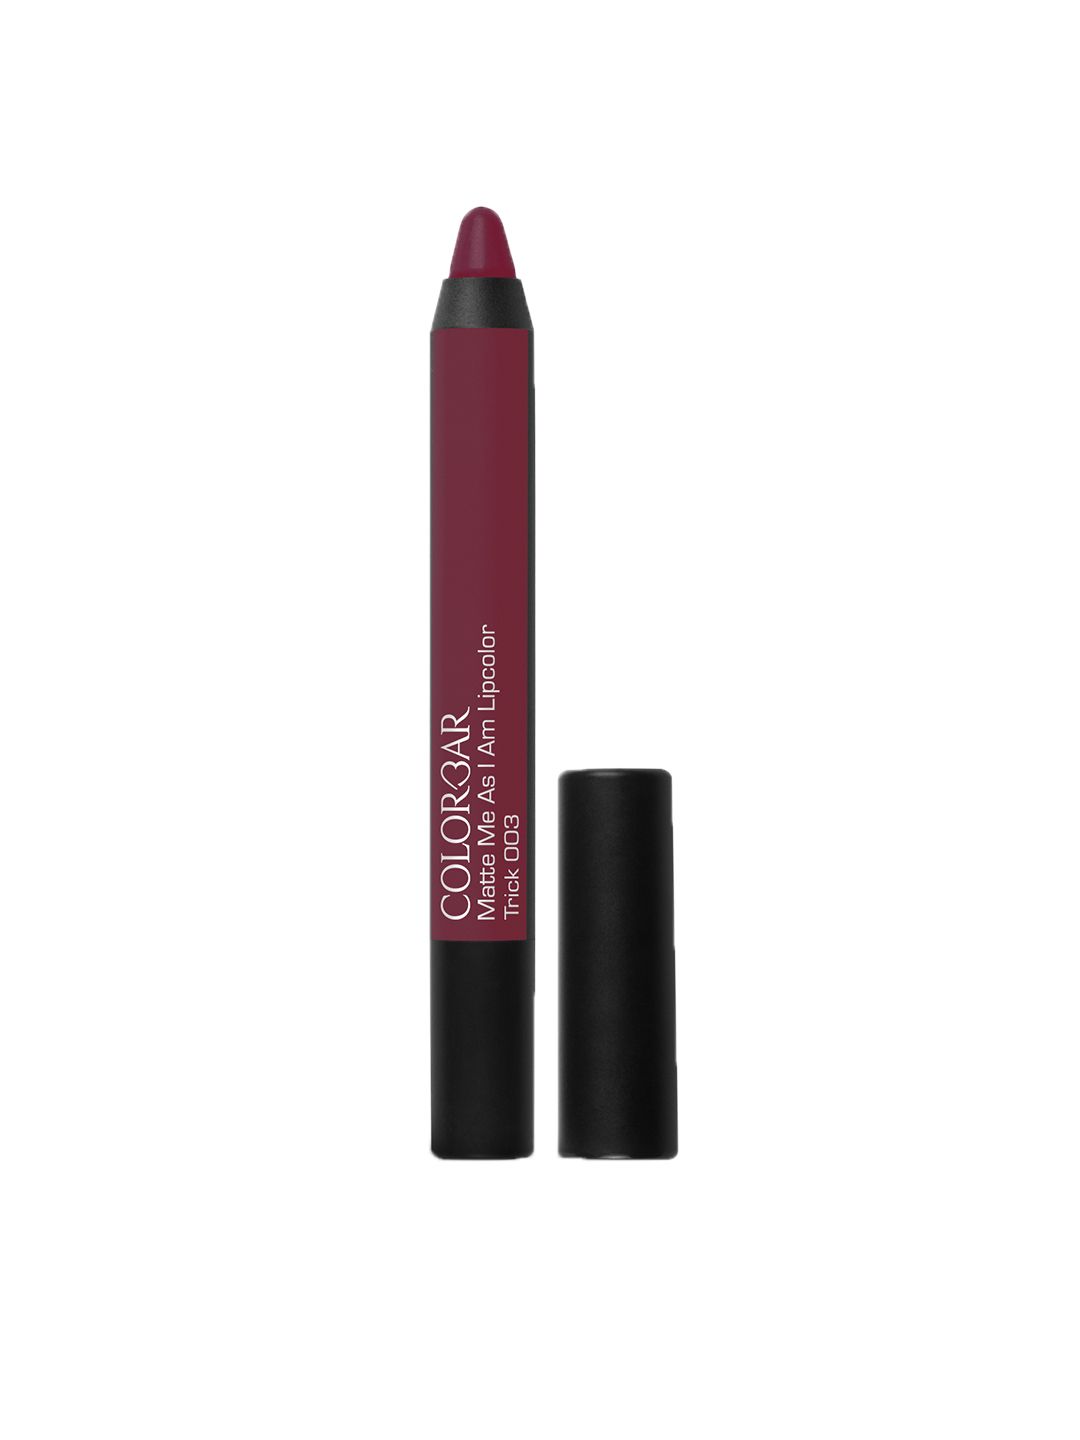 Colorbar Matte me as I am Lipcolor - 003 Trick 2.8g Price in India